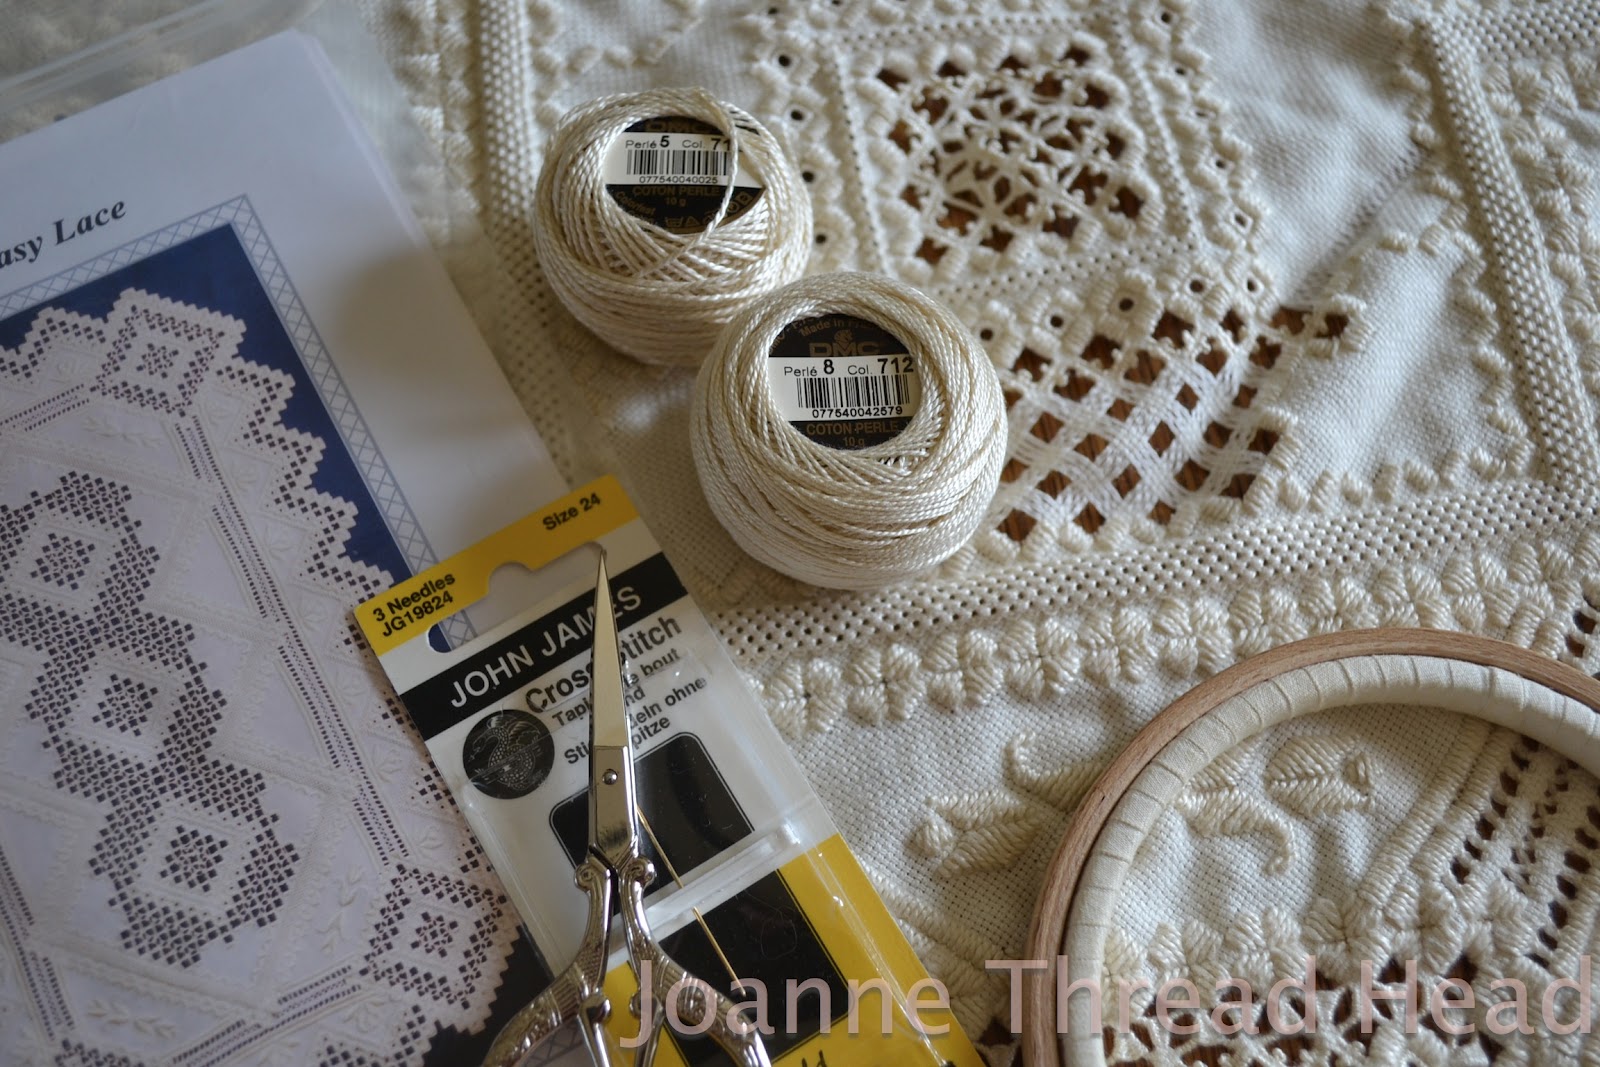 Everything you need for hardanger embroidery